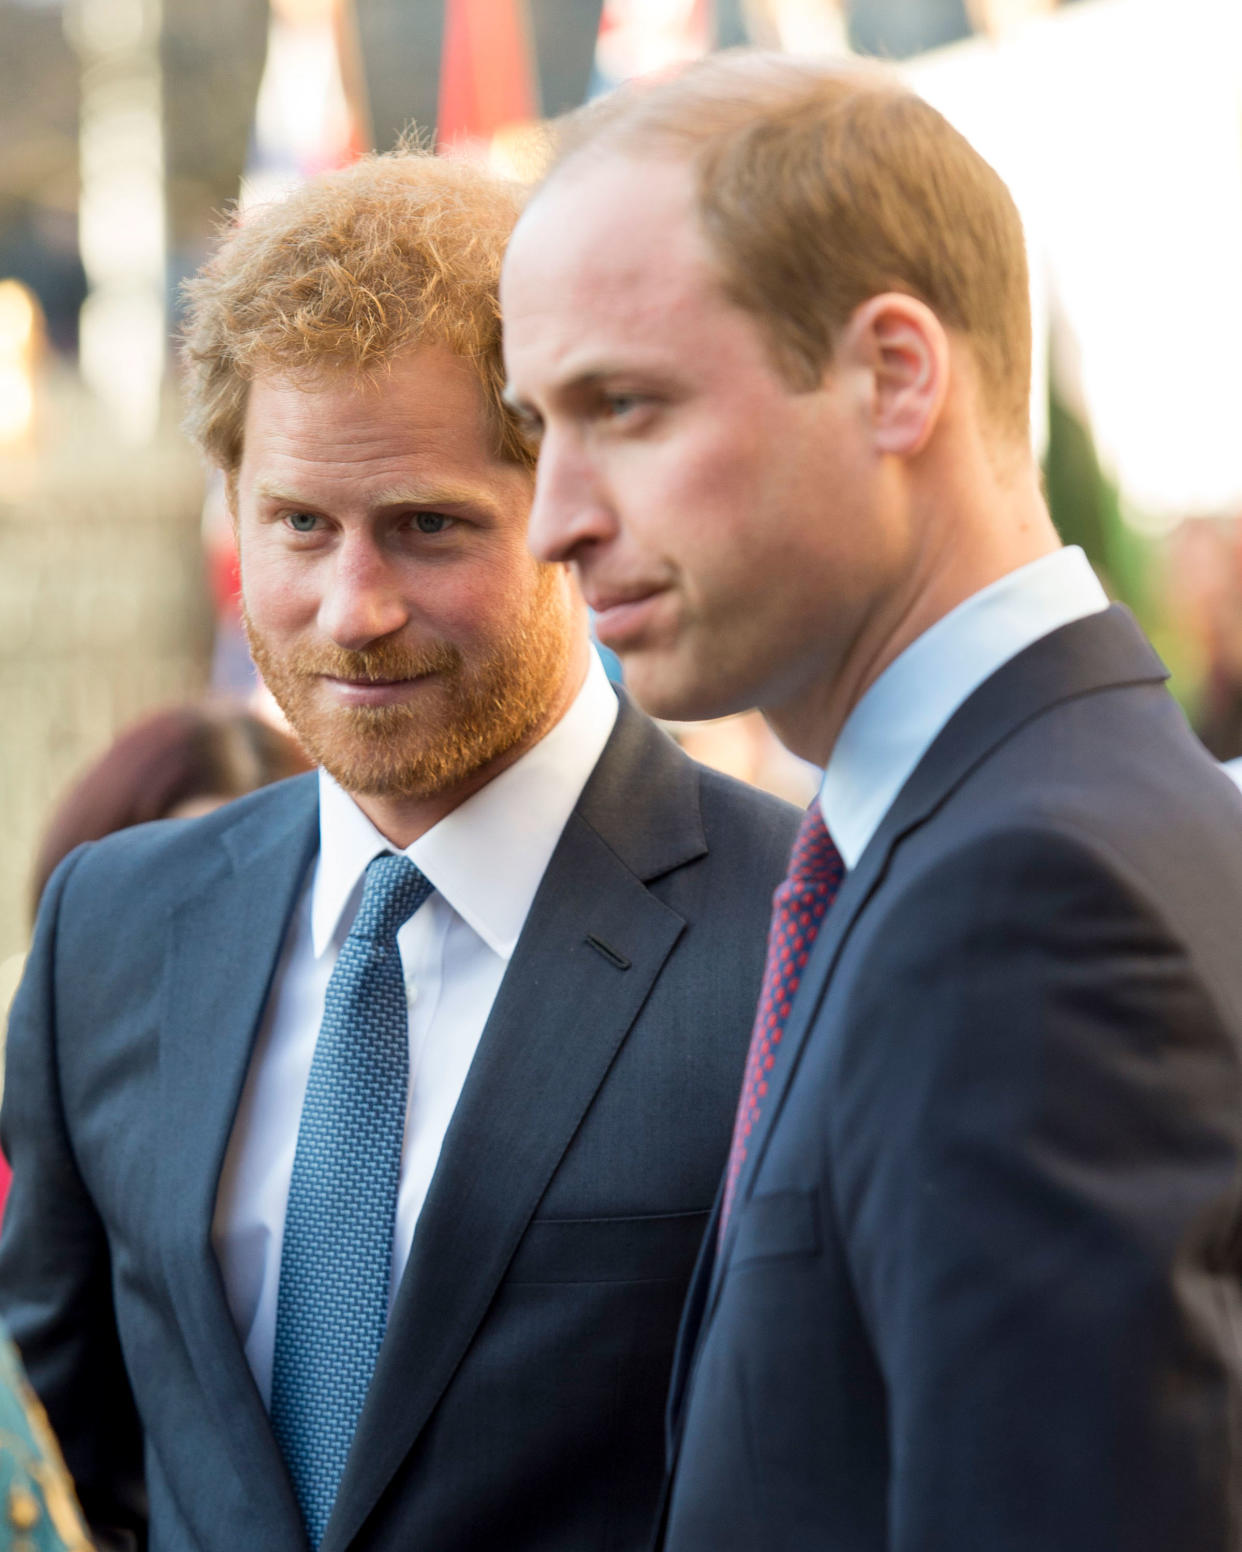 One royal author claims to know what started the rift between Prince Harry and Prince William. Photo: Getty Images